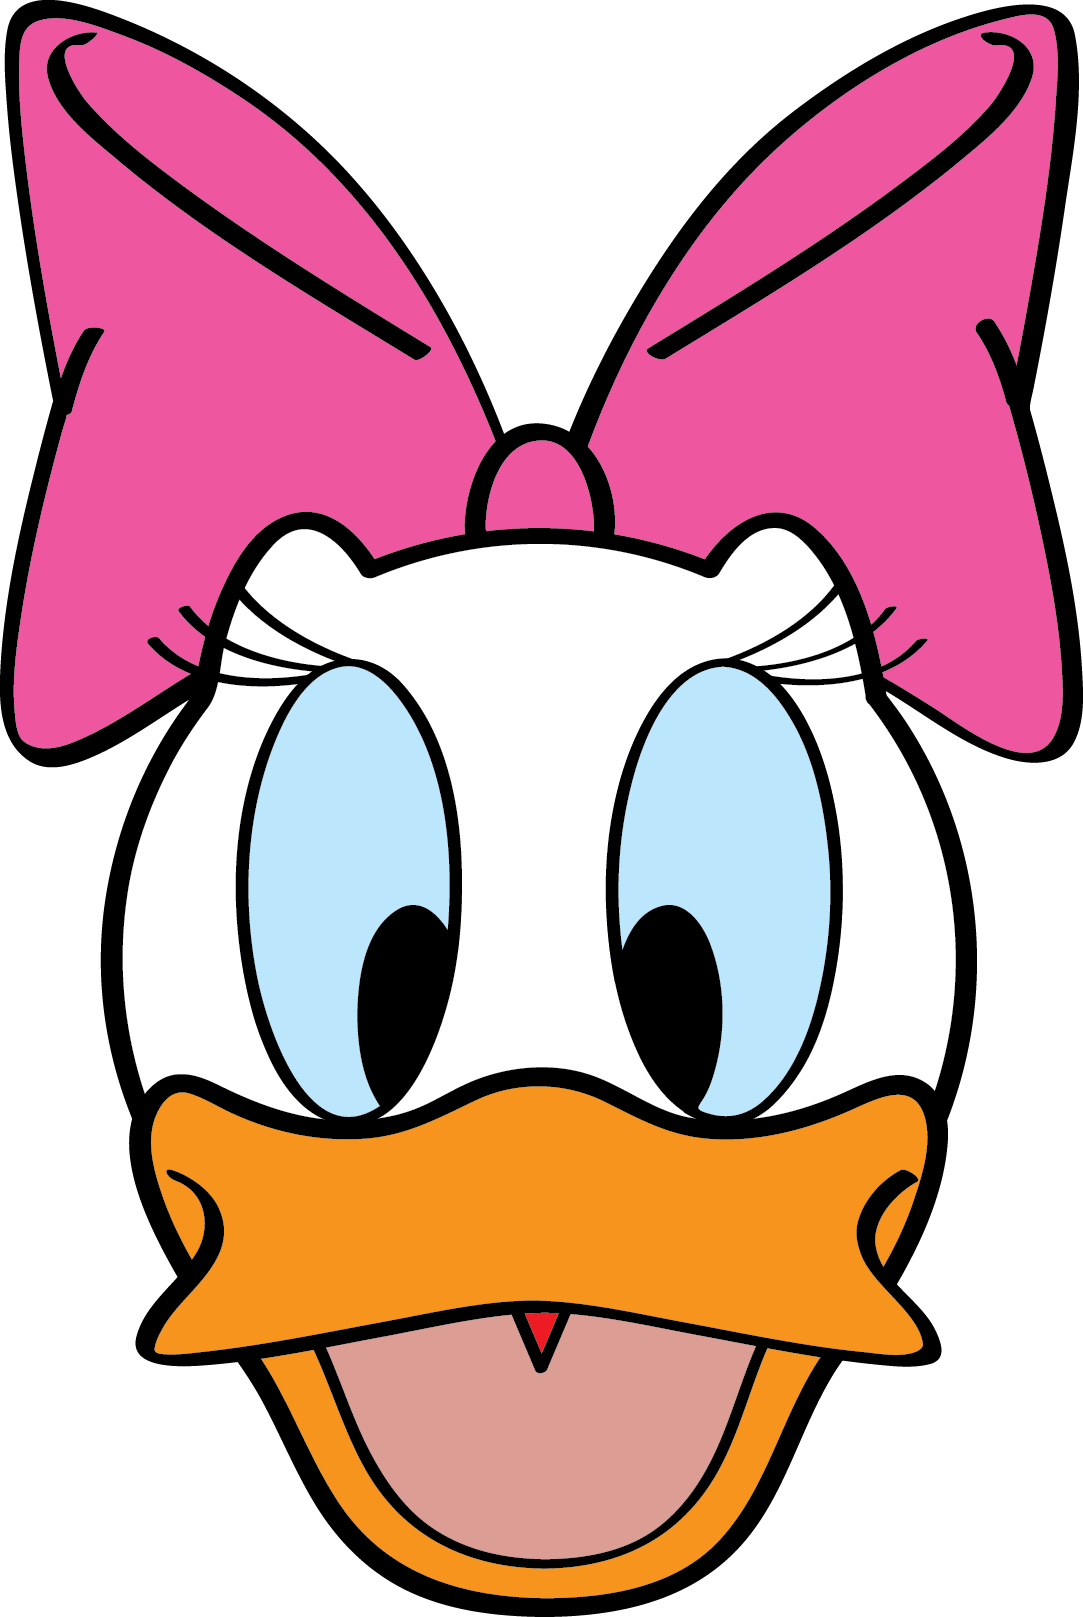 Daisy duck silhouette at. Daisies clipart face